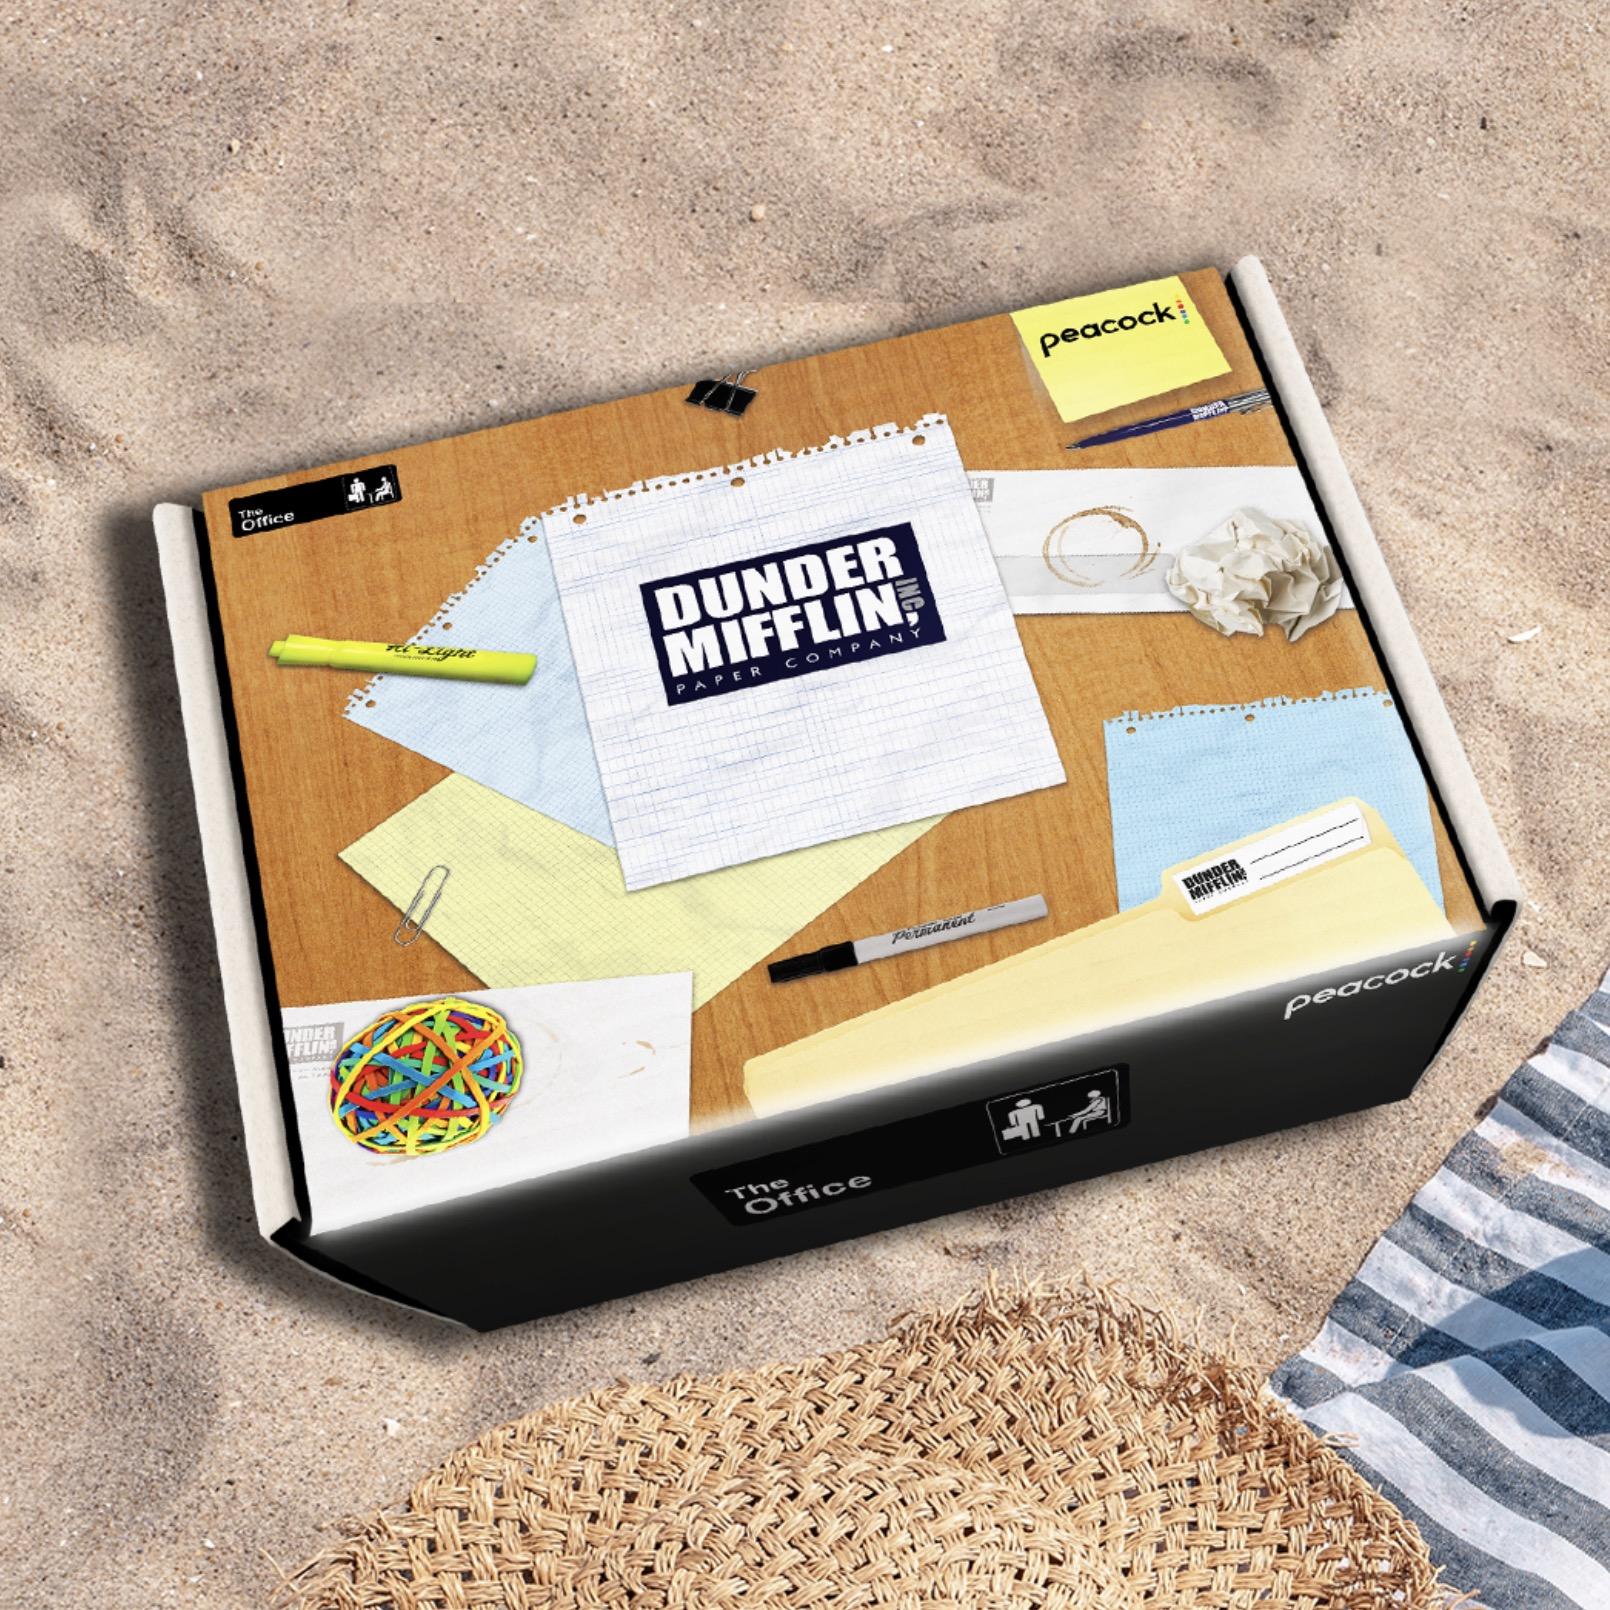 The Office Box from CultureFly Summer 2022 – On Sale Now!